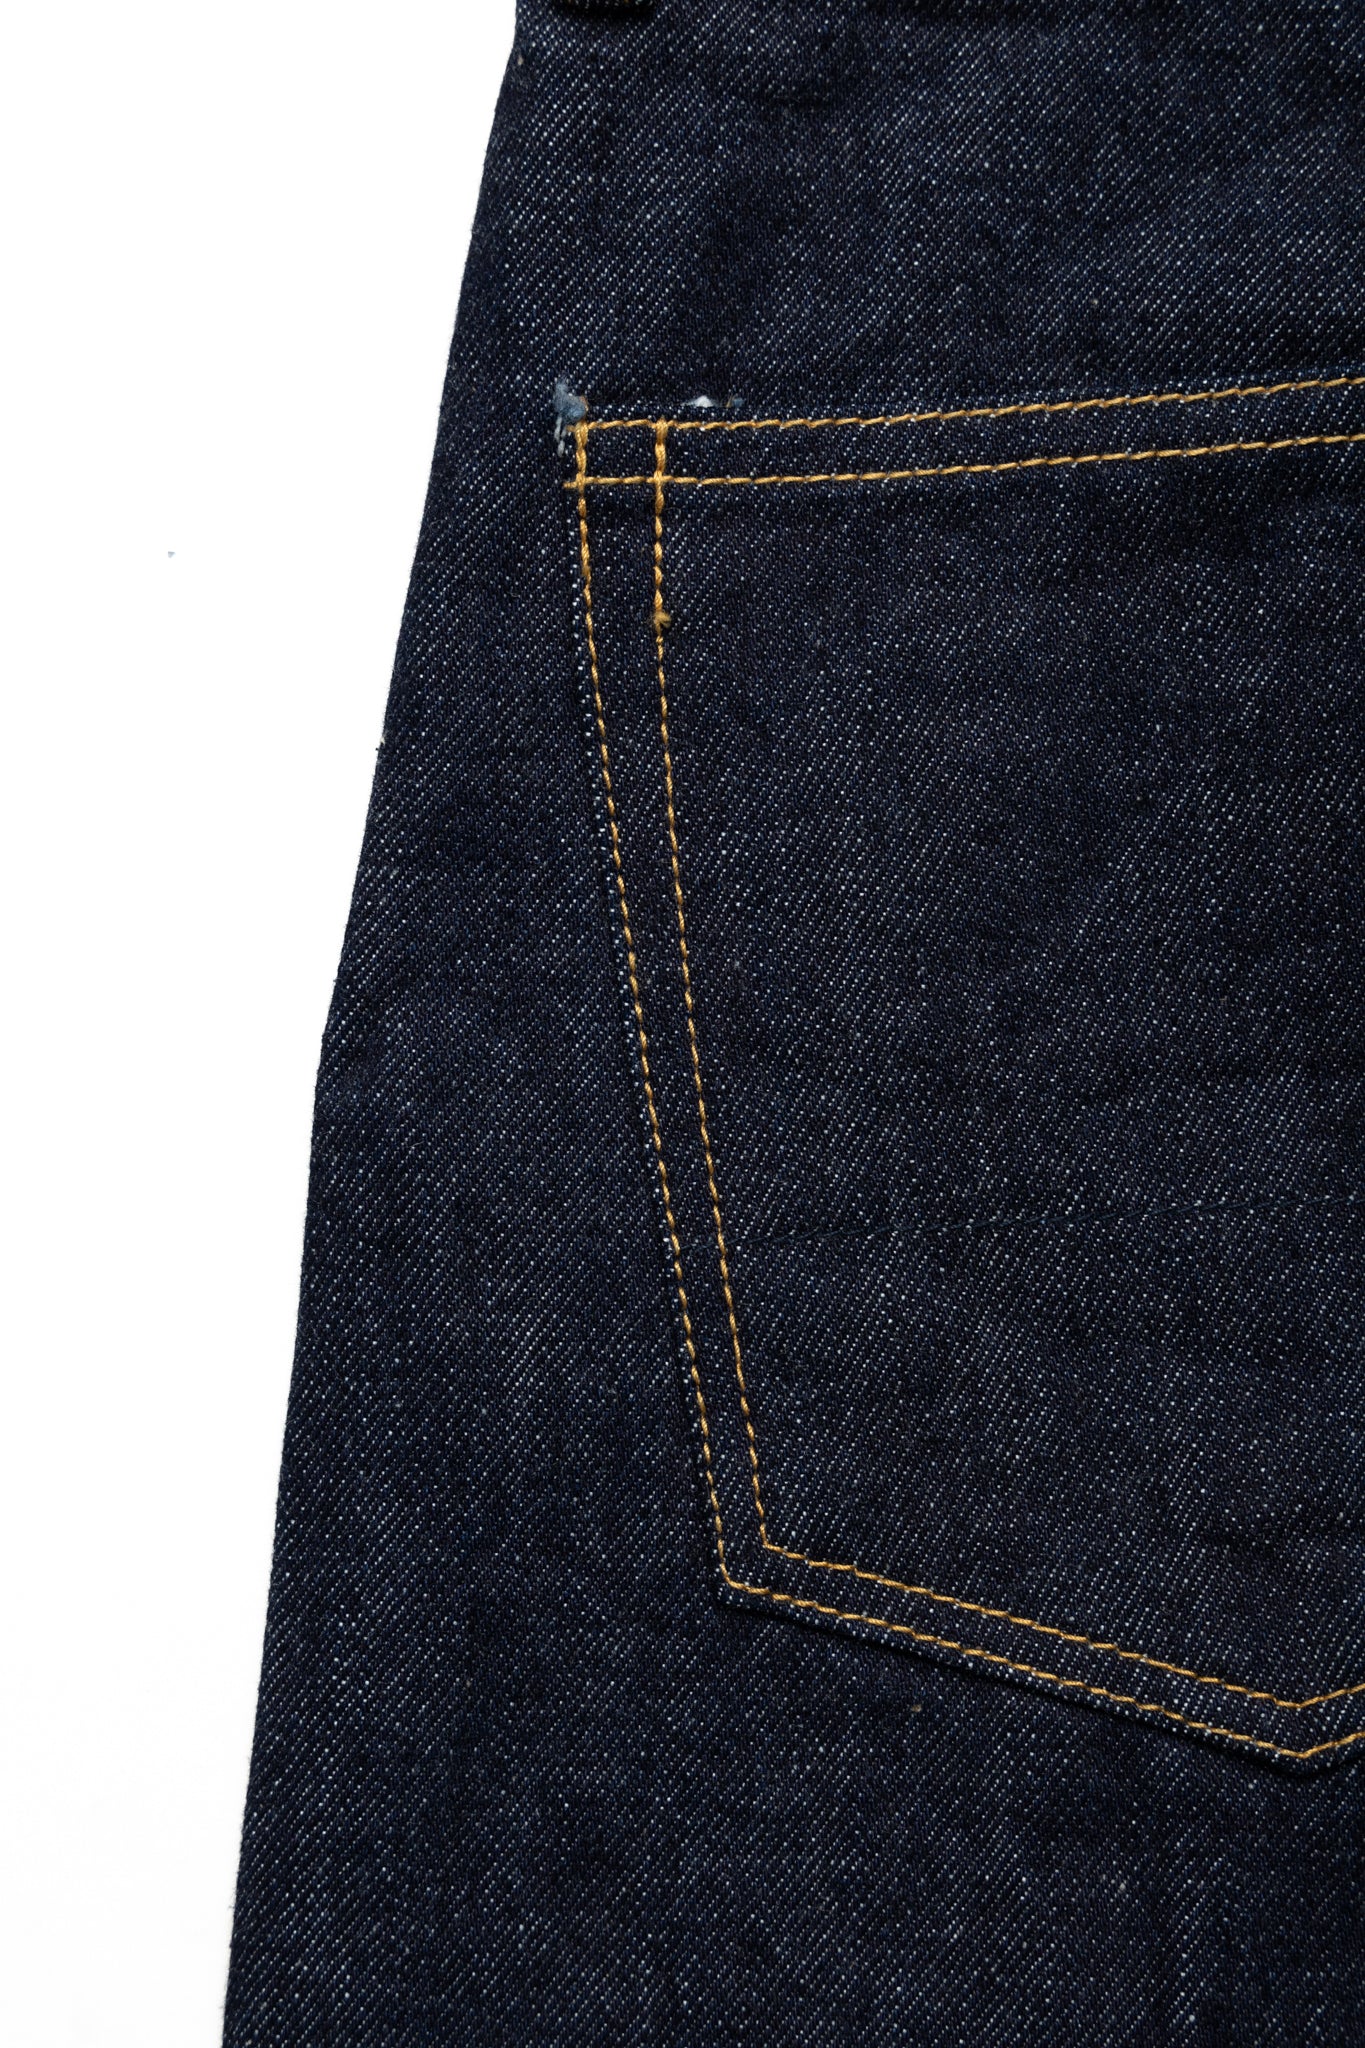 D1826S IVY Wash Jeans Relax Tapered